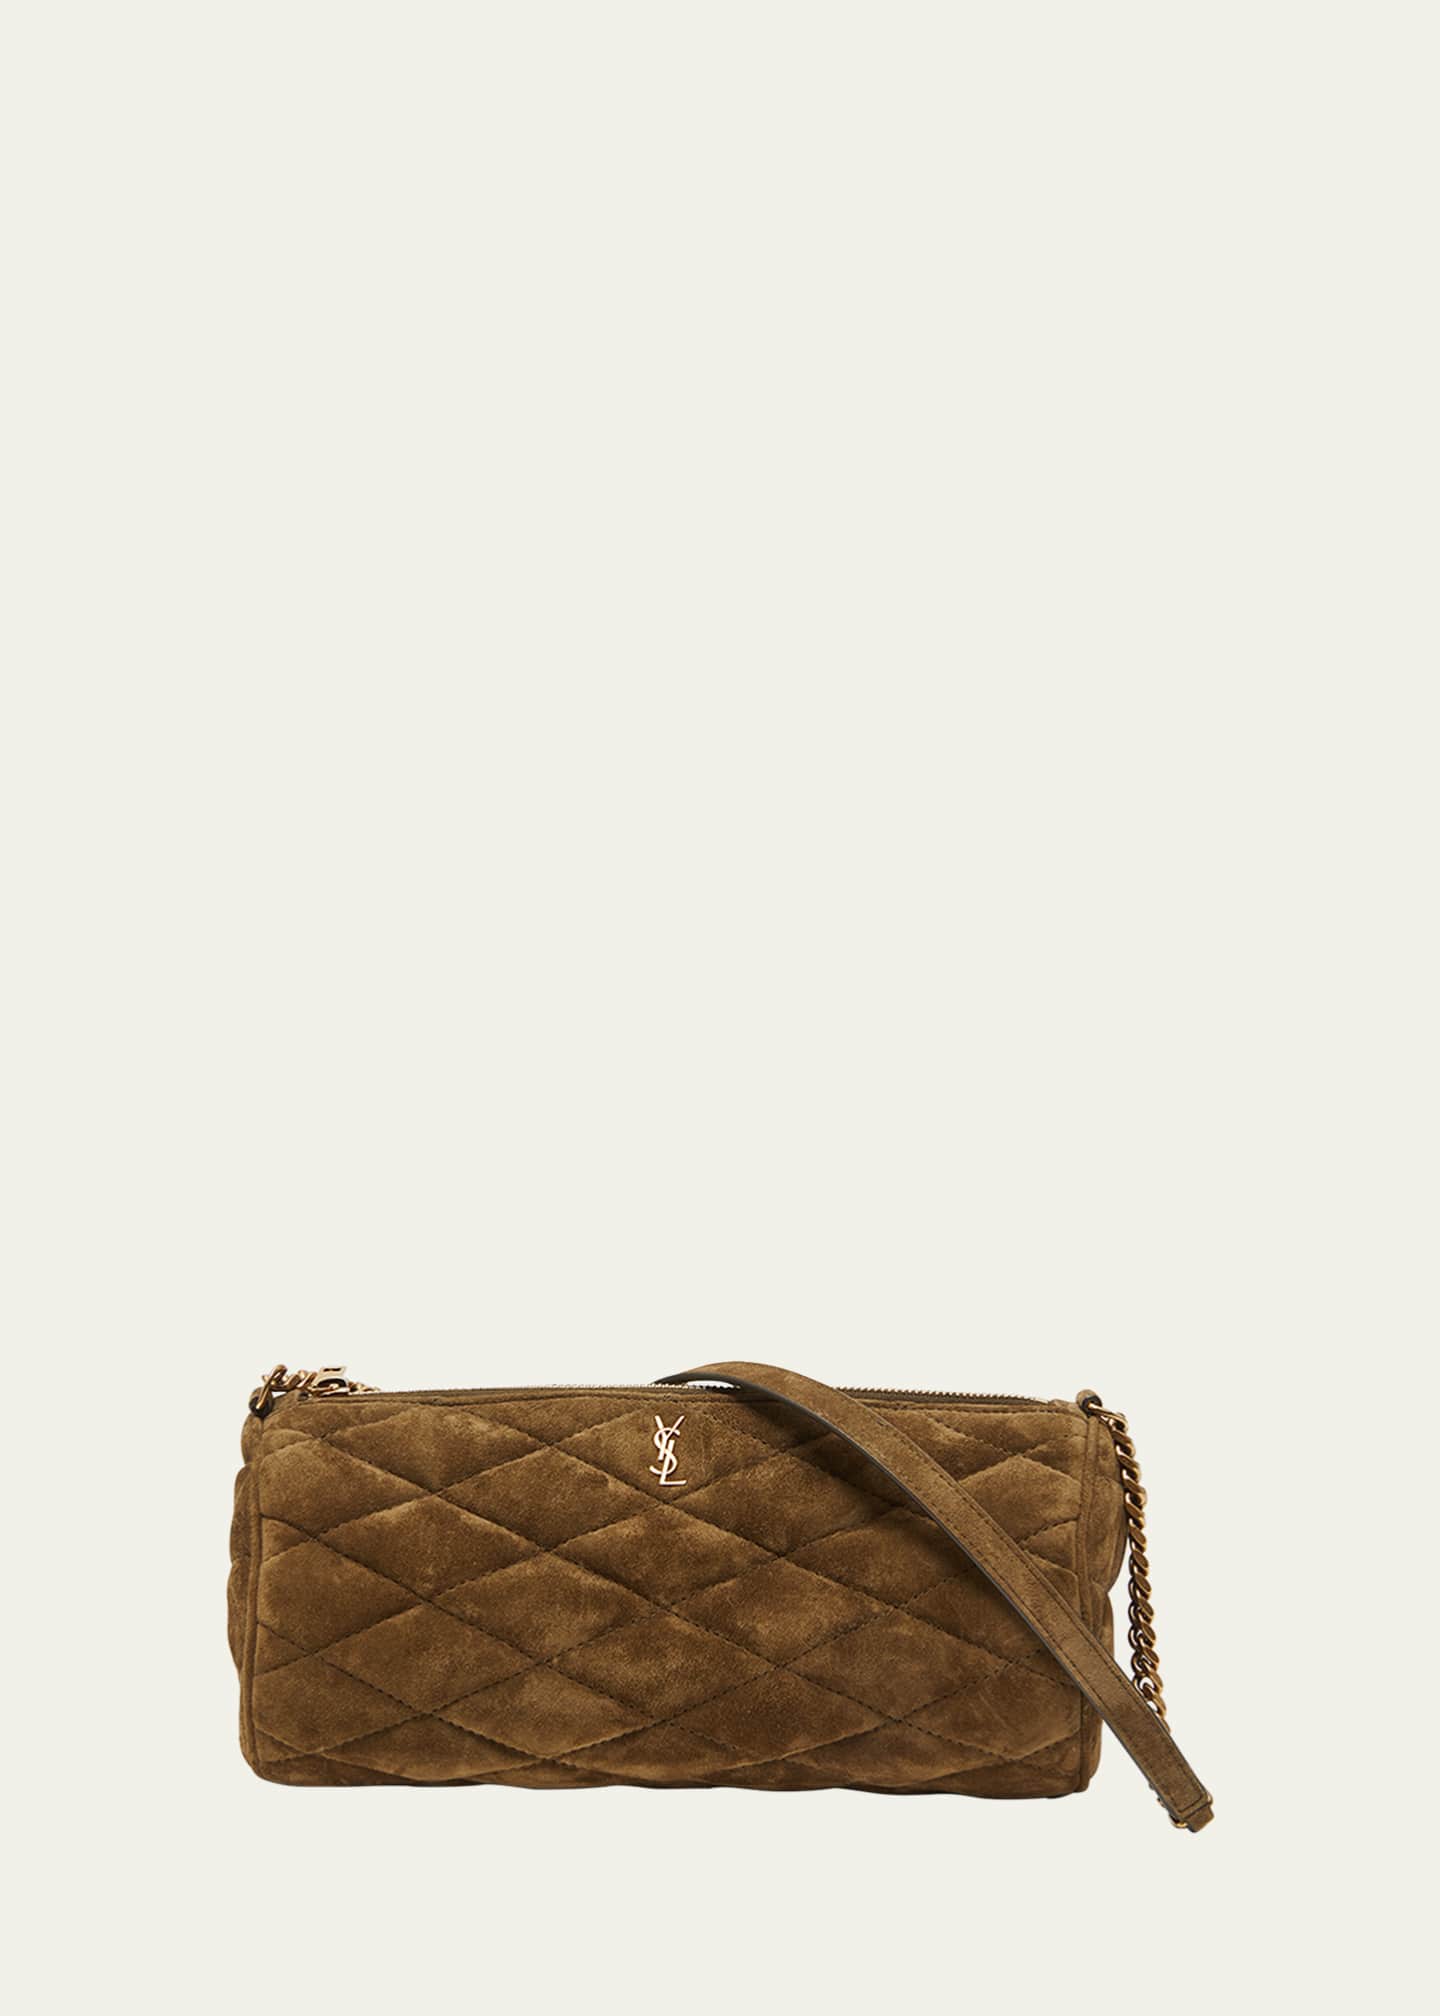 Saint Laurent loulou puffer small quilted suede shoulder bag